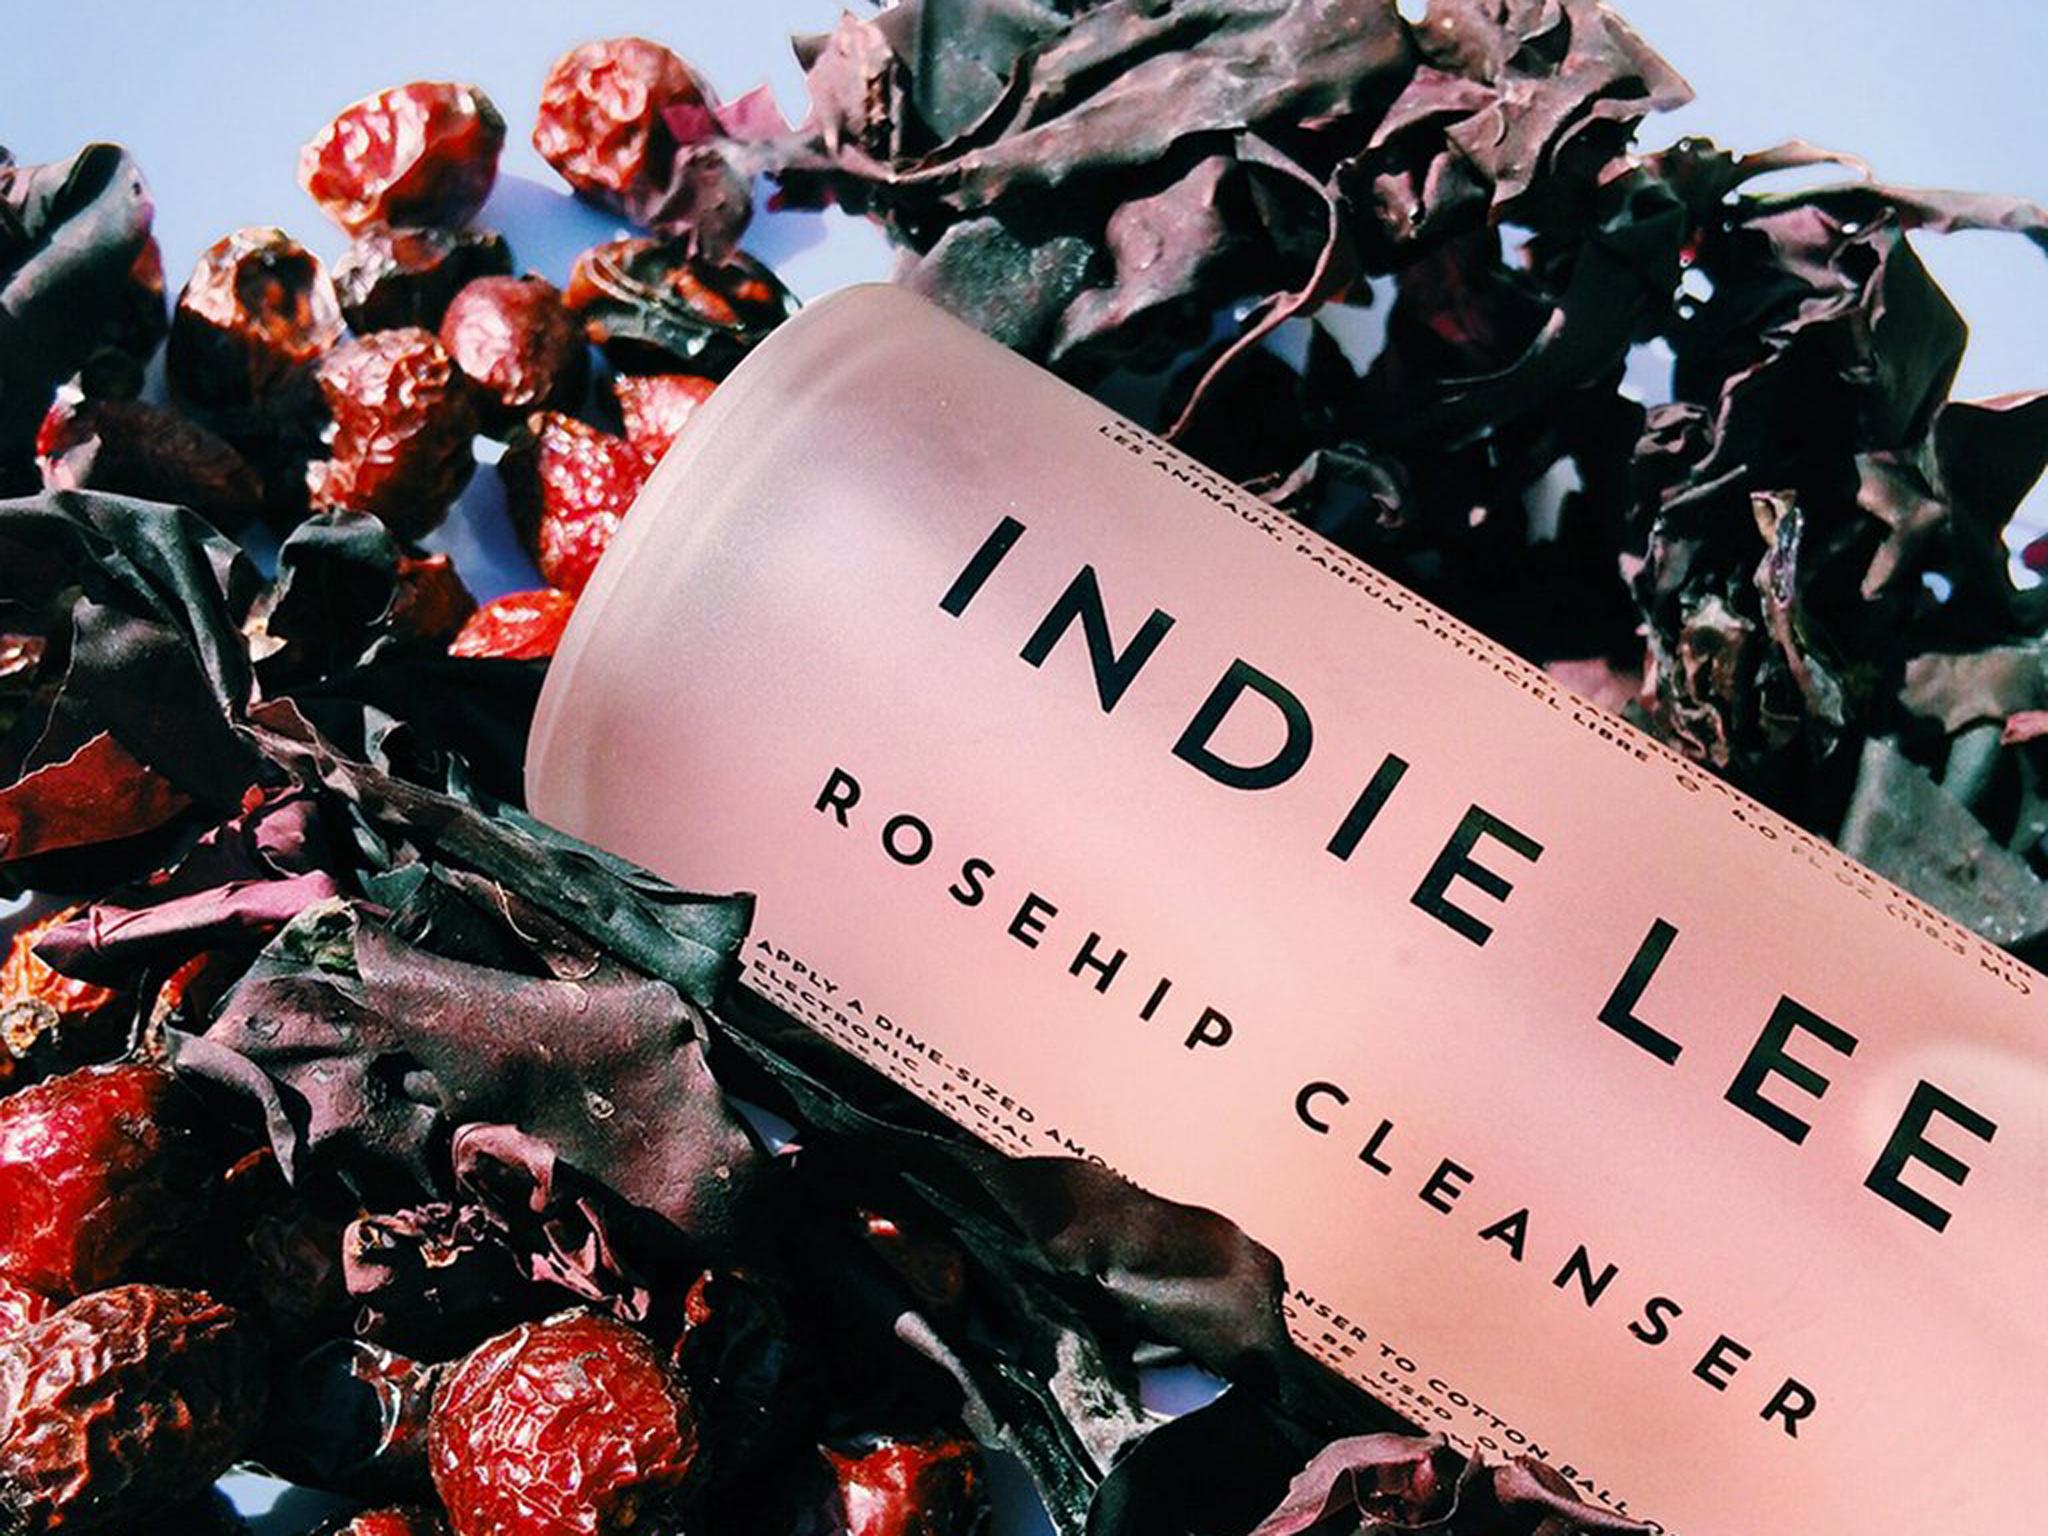 Soothe your skin with a gentle product, like Indie Lee's rosehip oil cleanser (£30 for 120ml)